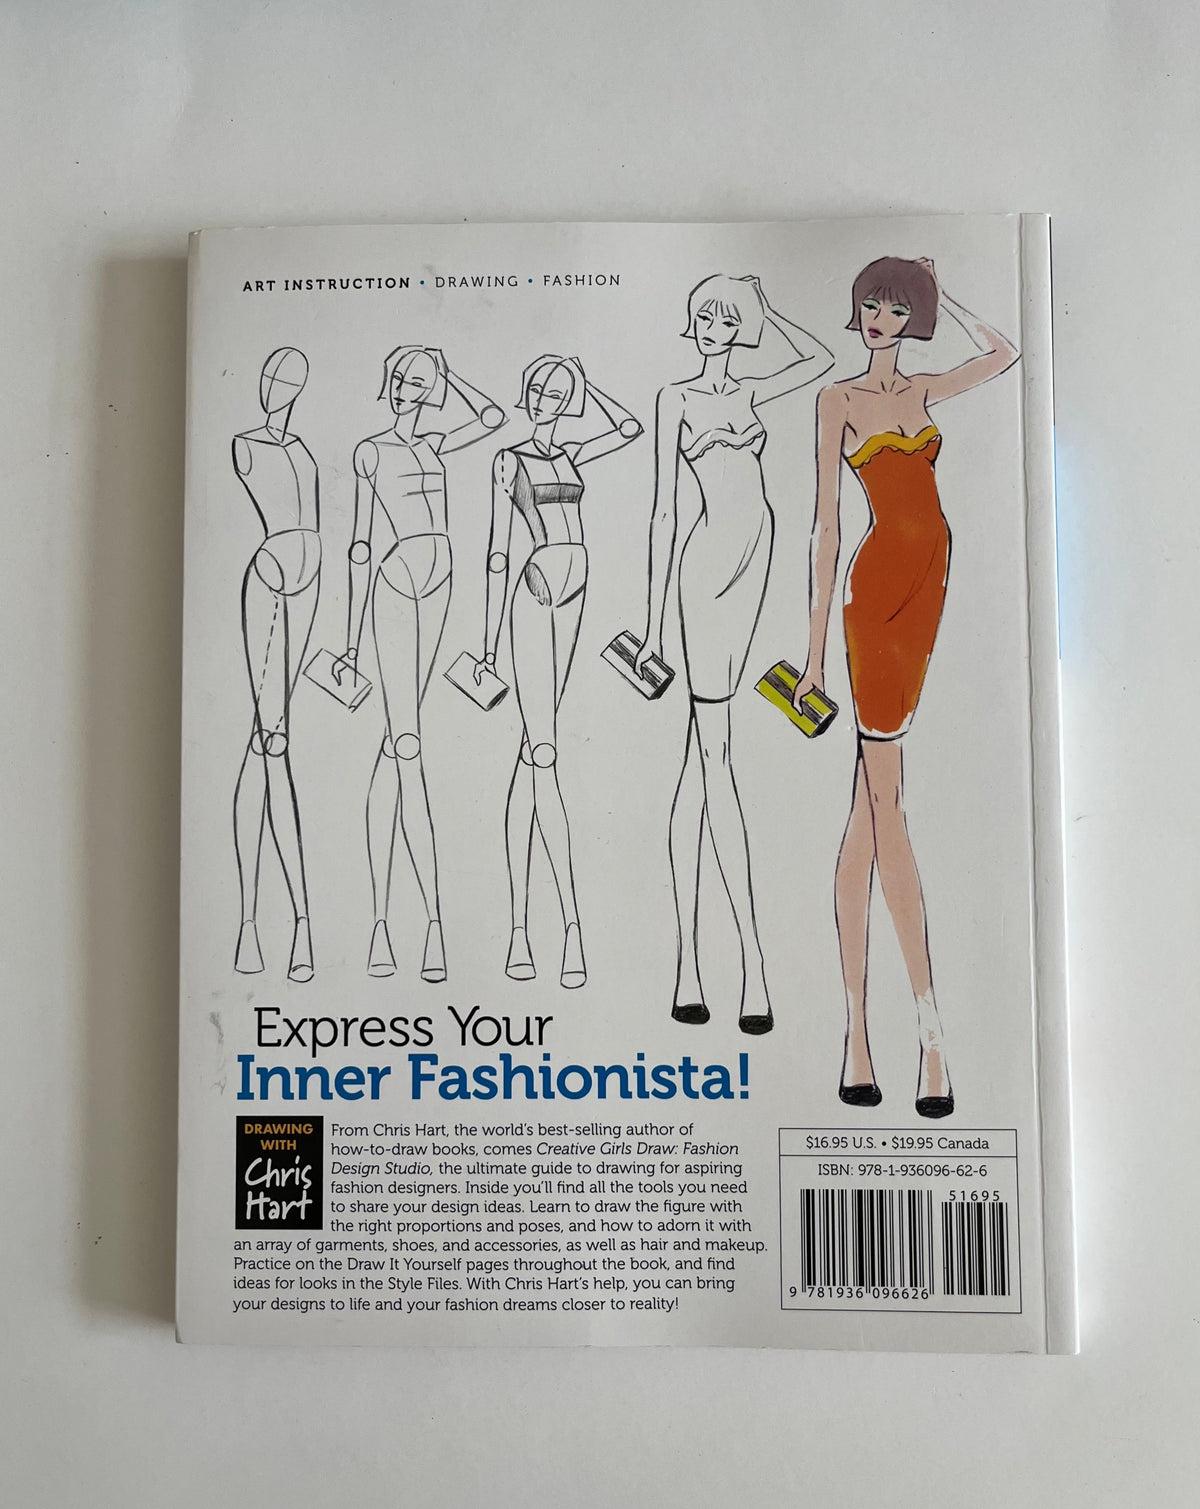 Fashion Design Studio: Learn to Draw Figures, Fashion, Hairstyles &amp; More by Chris Hart